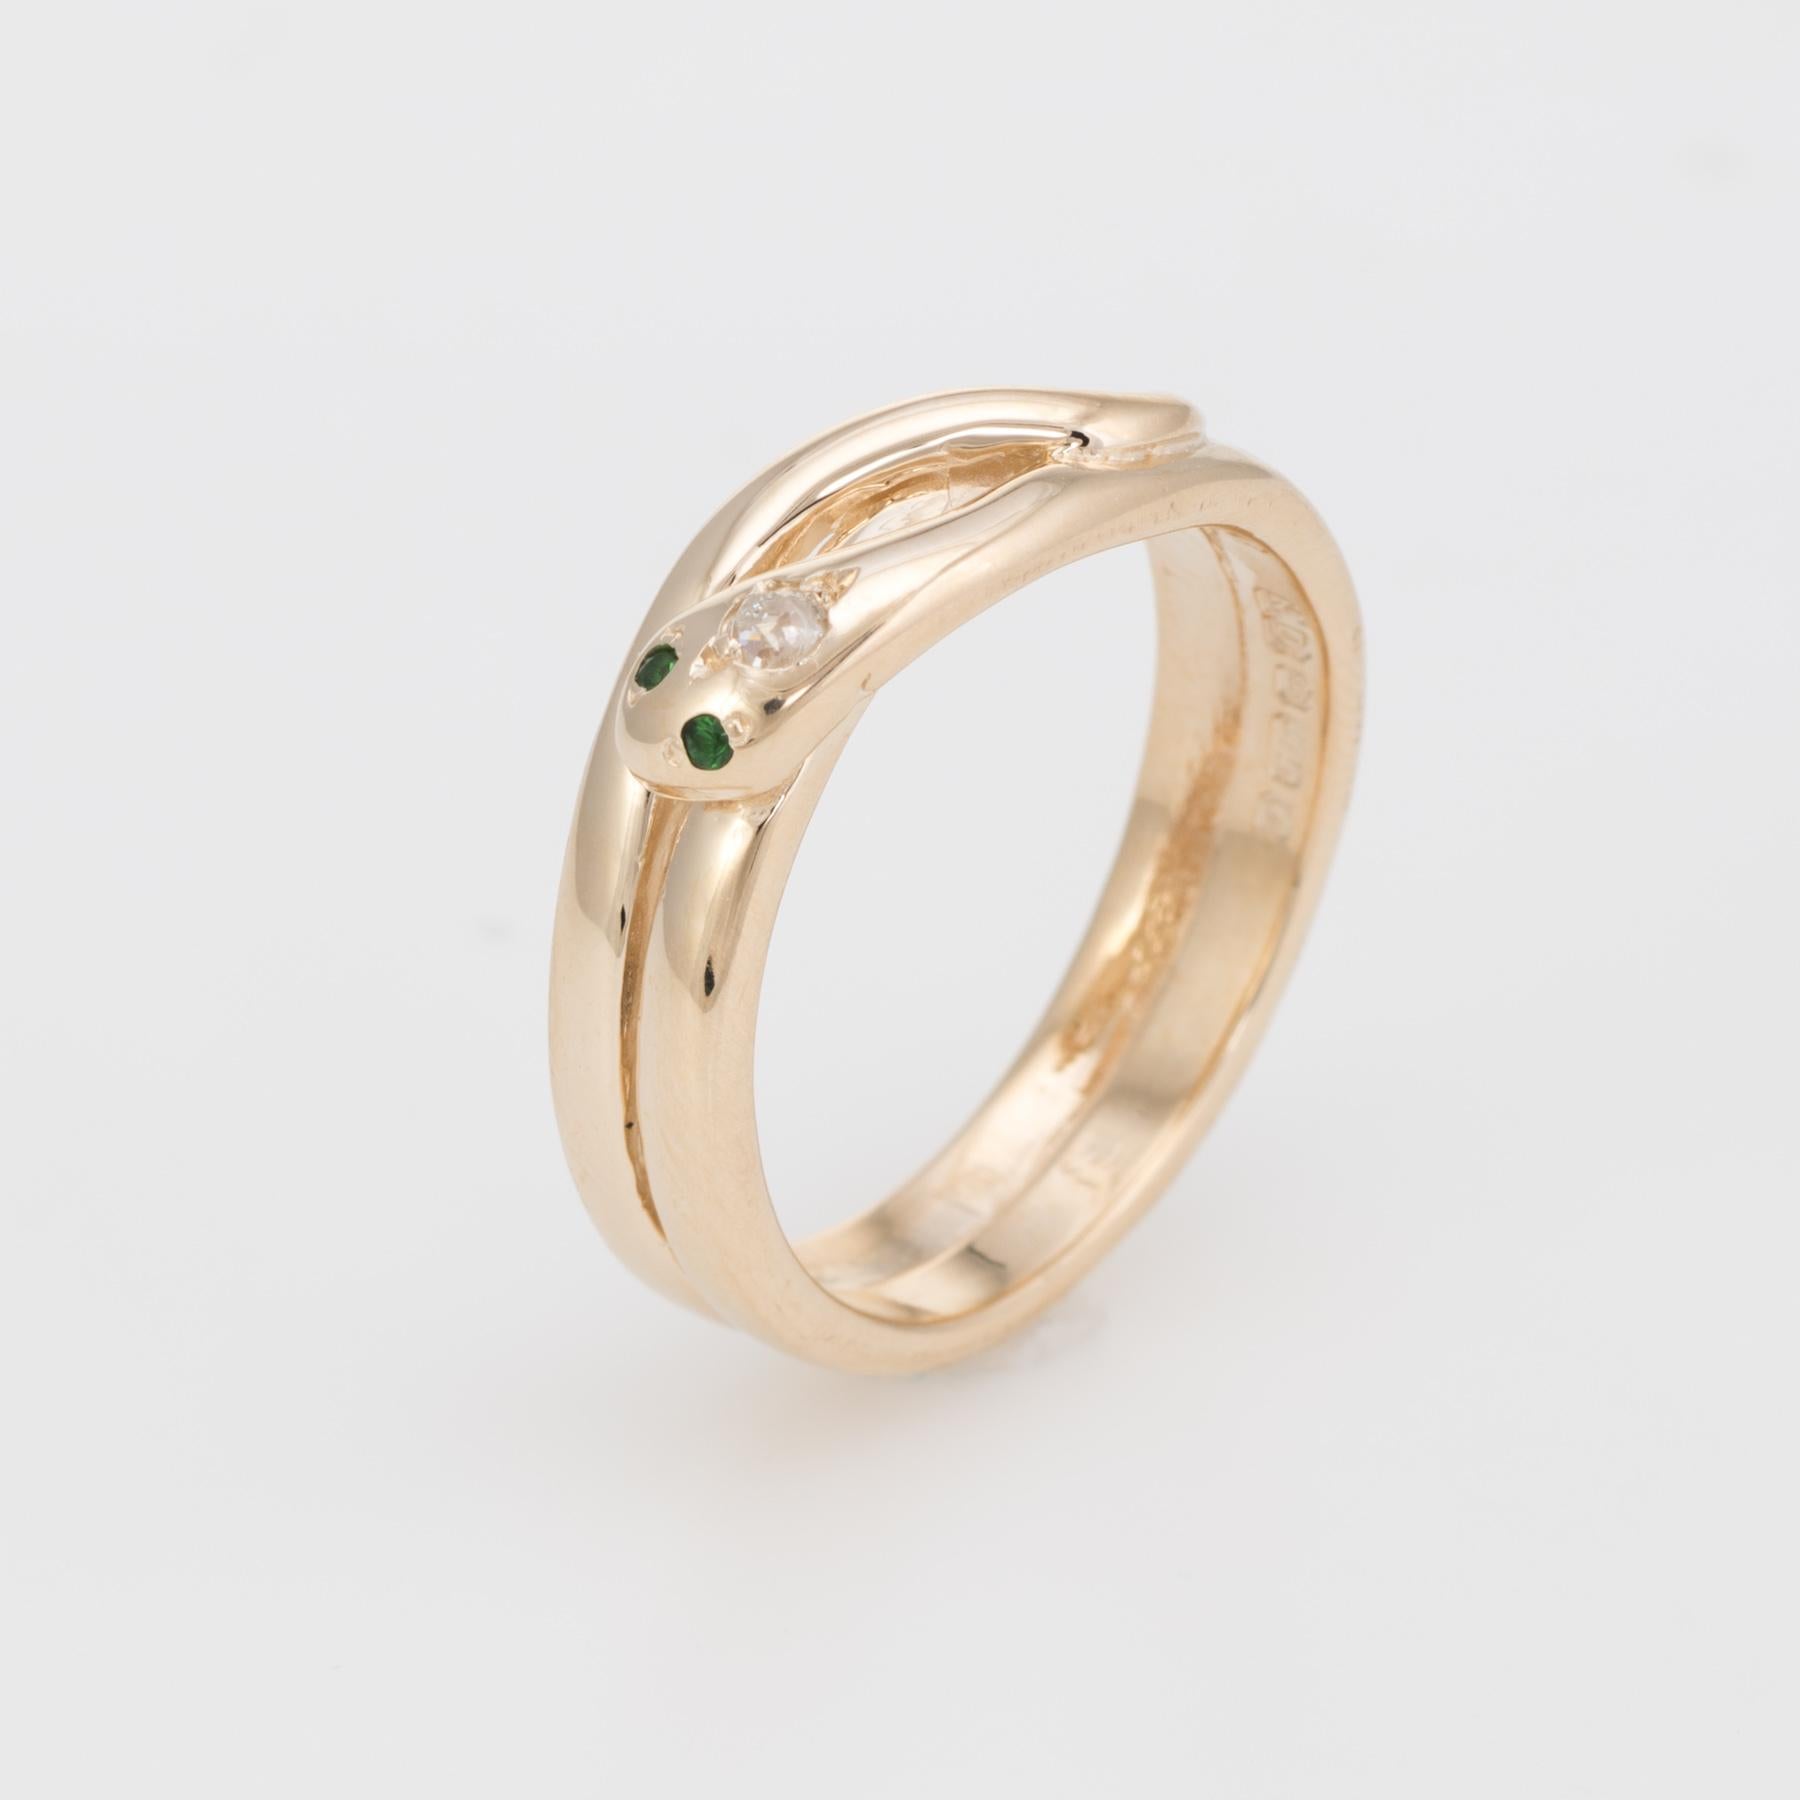 Finely detailed vintage snake ring, crafted in 18 karat yellow gold. 

One estimated 0.05 carat old mine cut diamond (estimated at I-J color and SI2 clarity), is accented with two estimated 0.02 carat emeralds (total estimated weight of 0.04